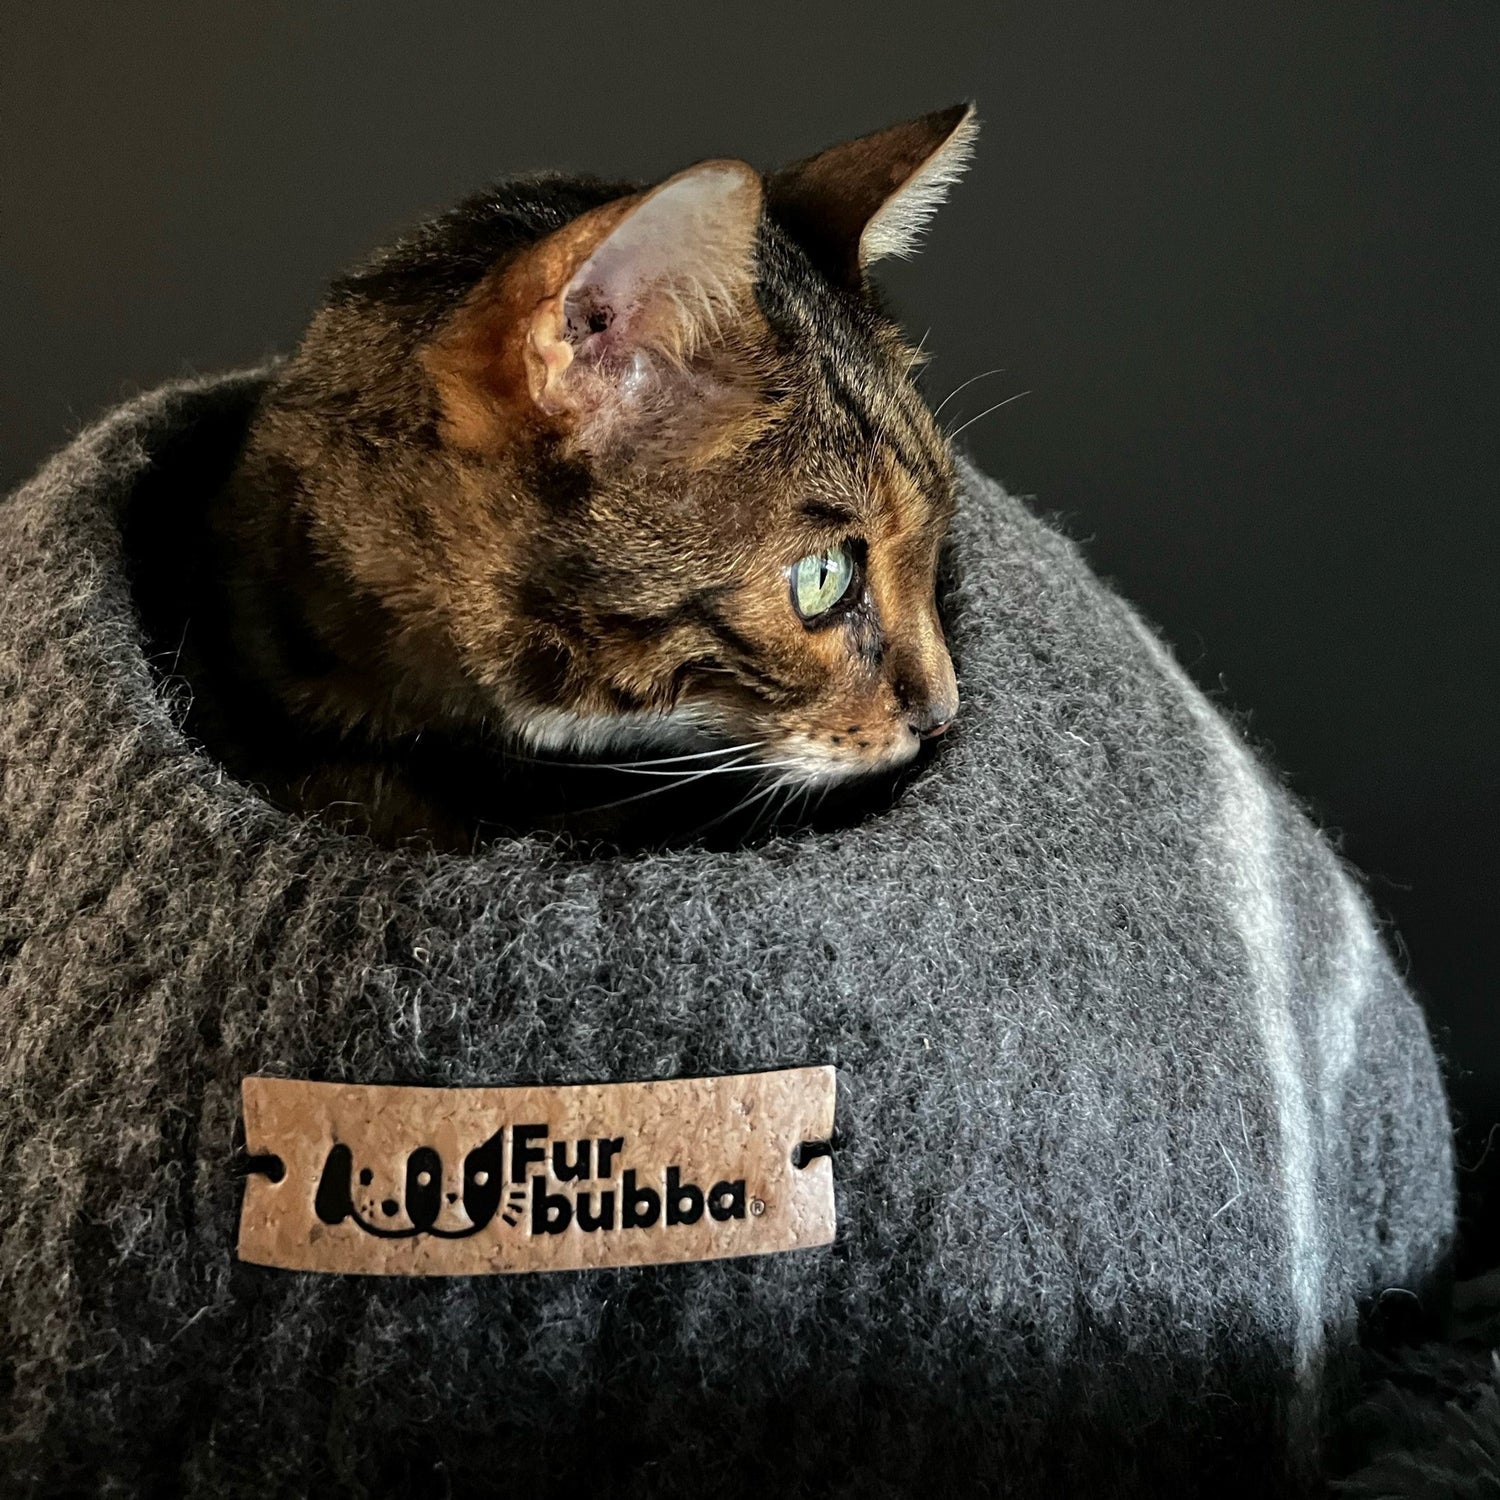 Oscar the Bengal Cat with striking green eyes, loving his new cat bed - a Furbubba Cat Cave